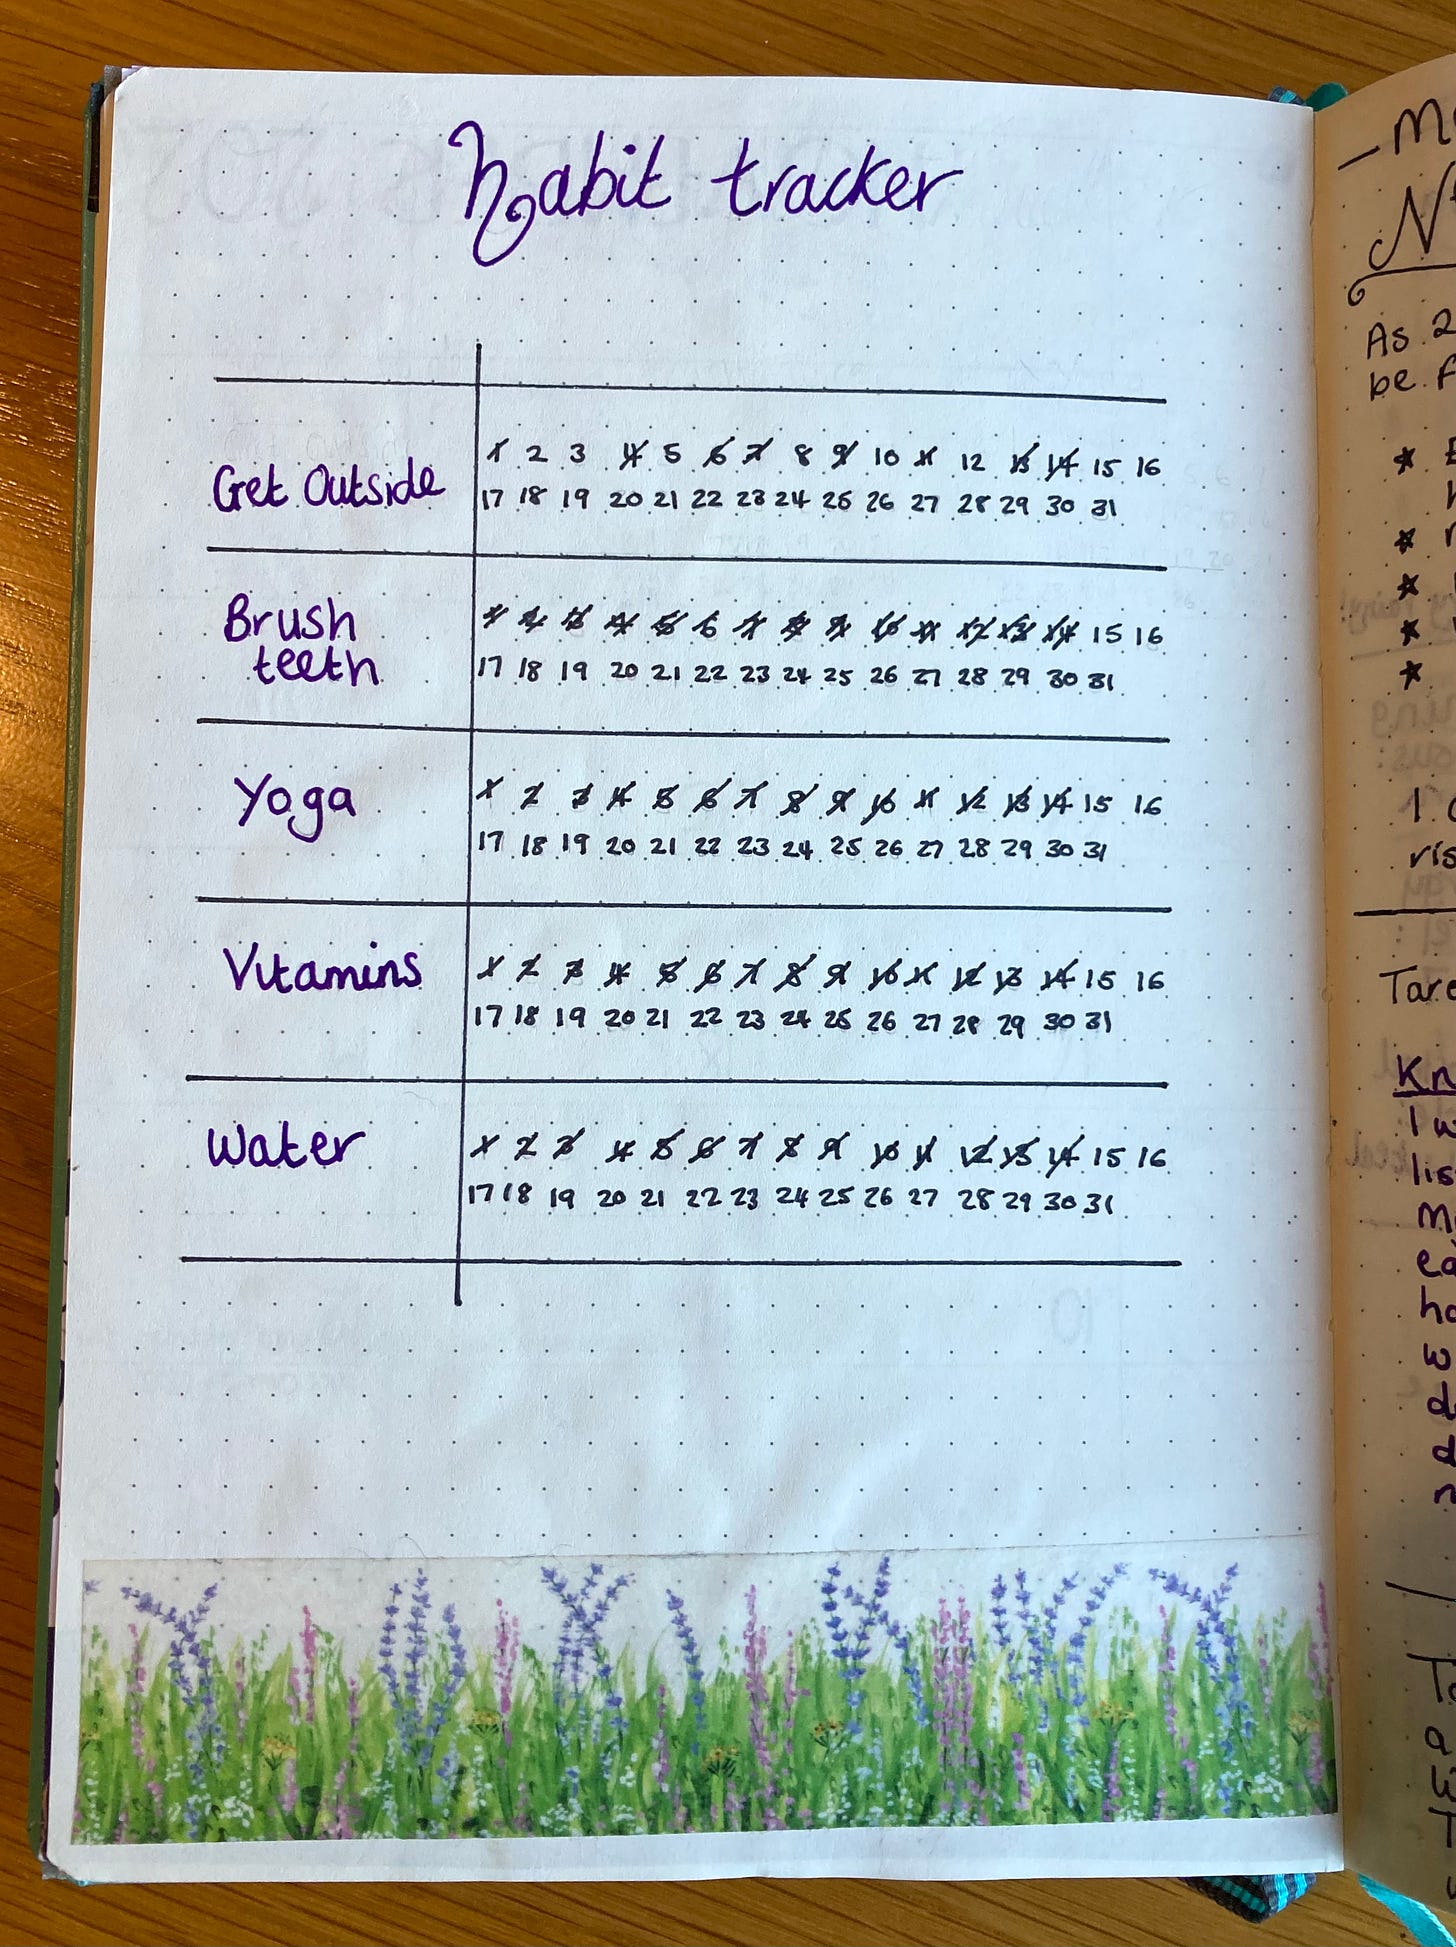 A photograph of my January habit tracker in my bullet journal. 